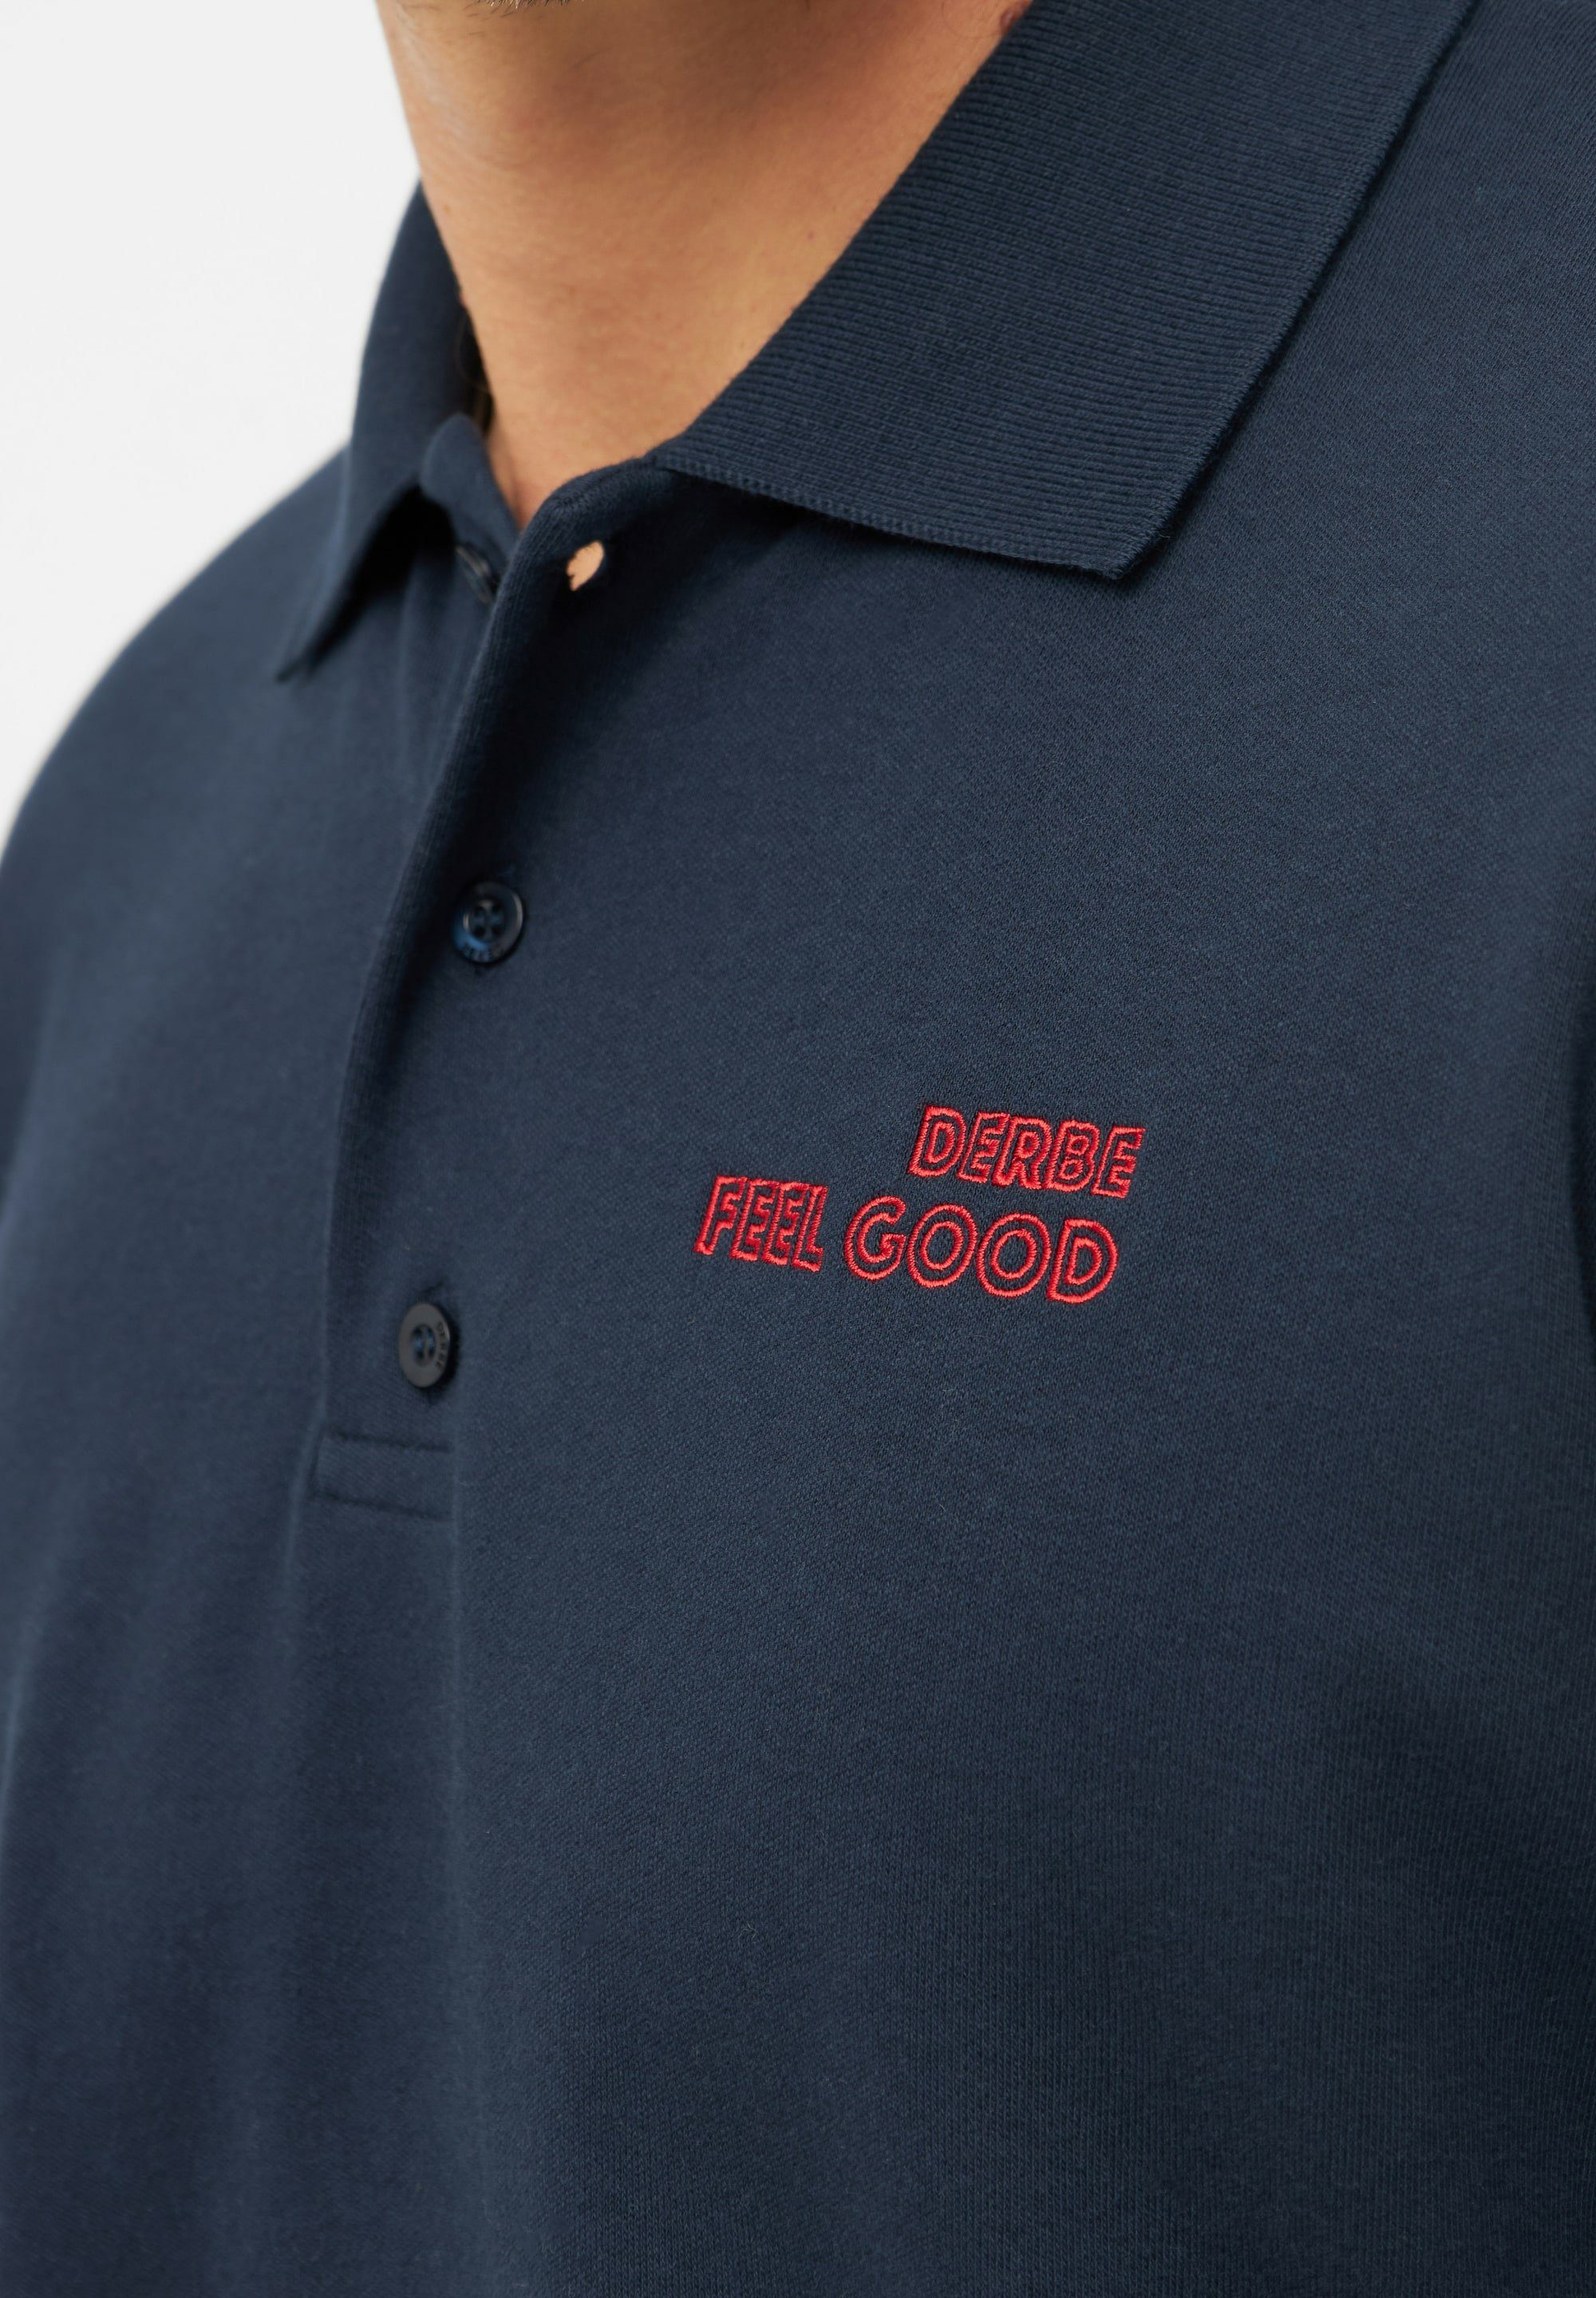 Qualität in Poloshirt Derbe tolle Good Made Feel Portugal,